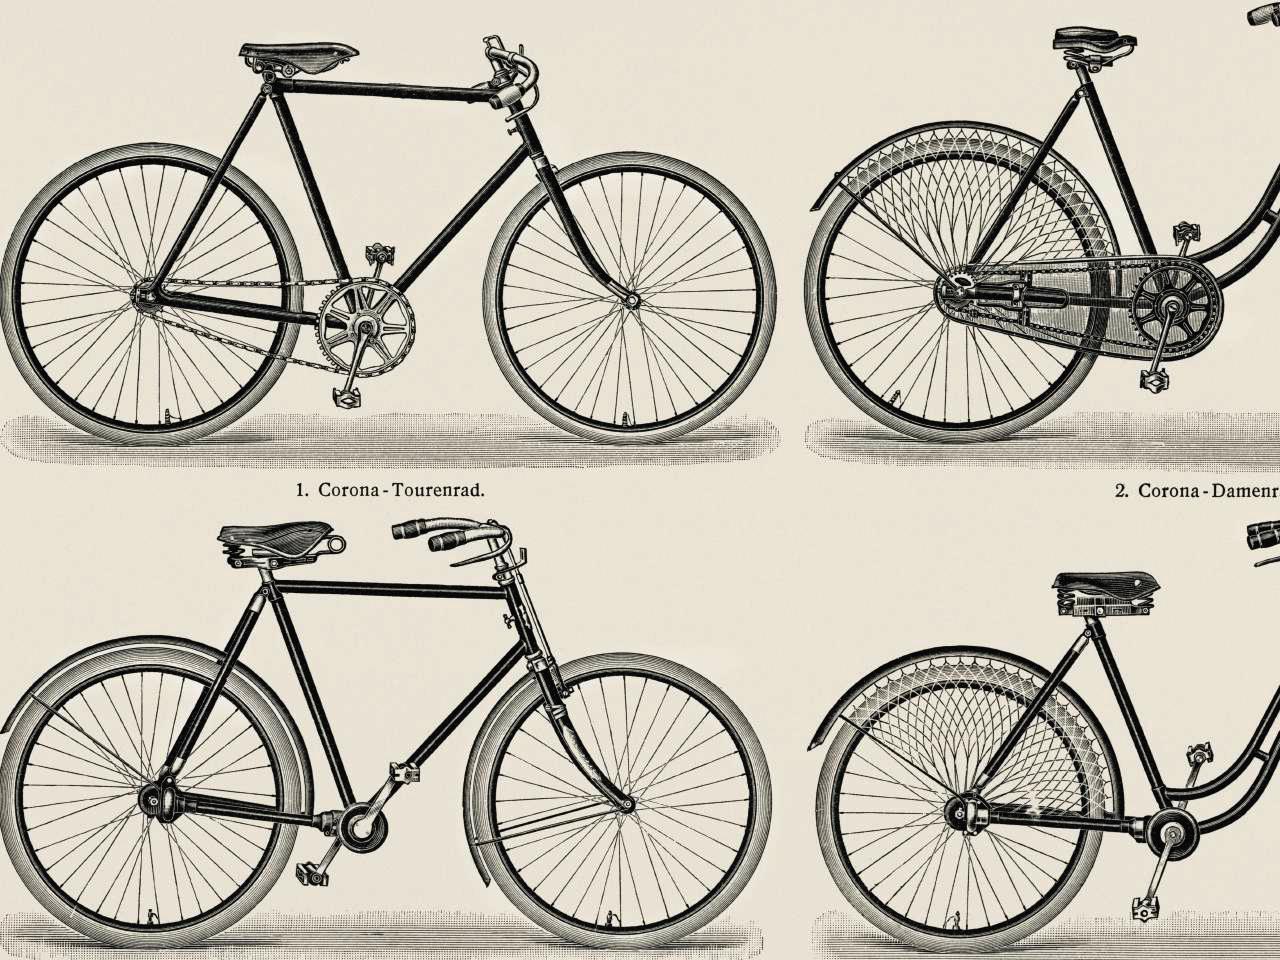 Line drawings of four antique touring bicycles.